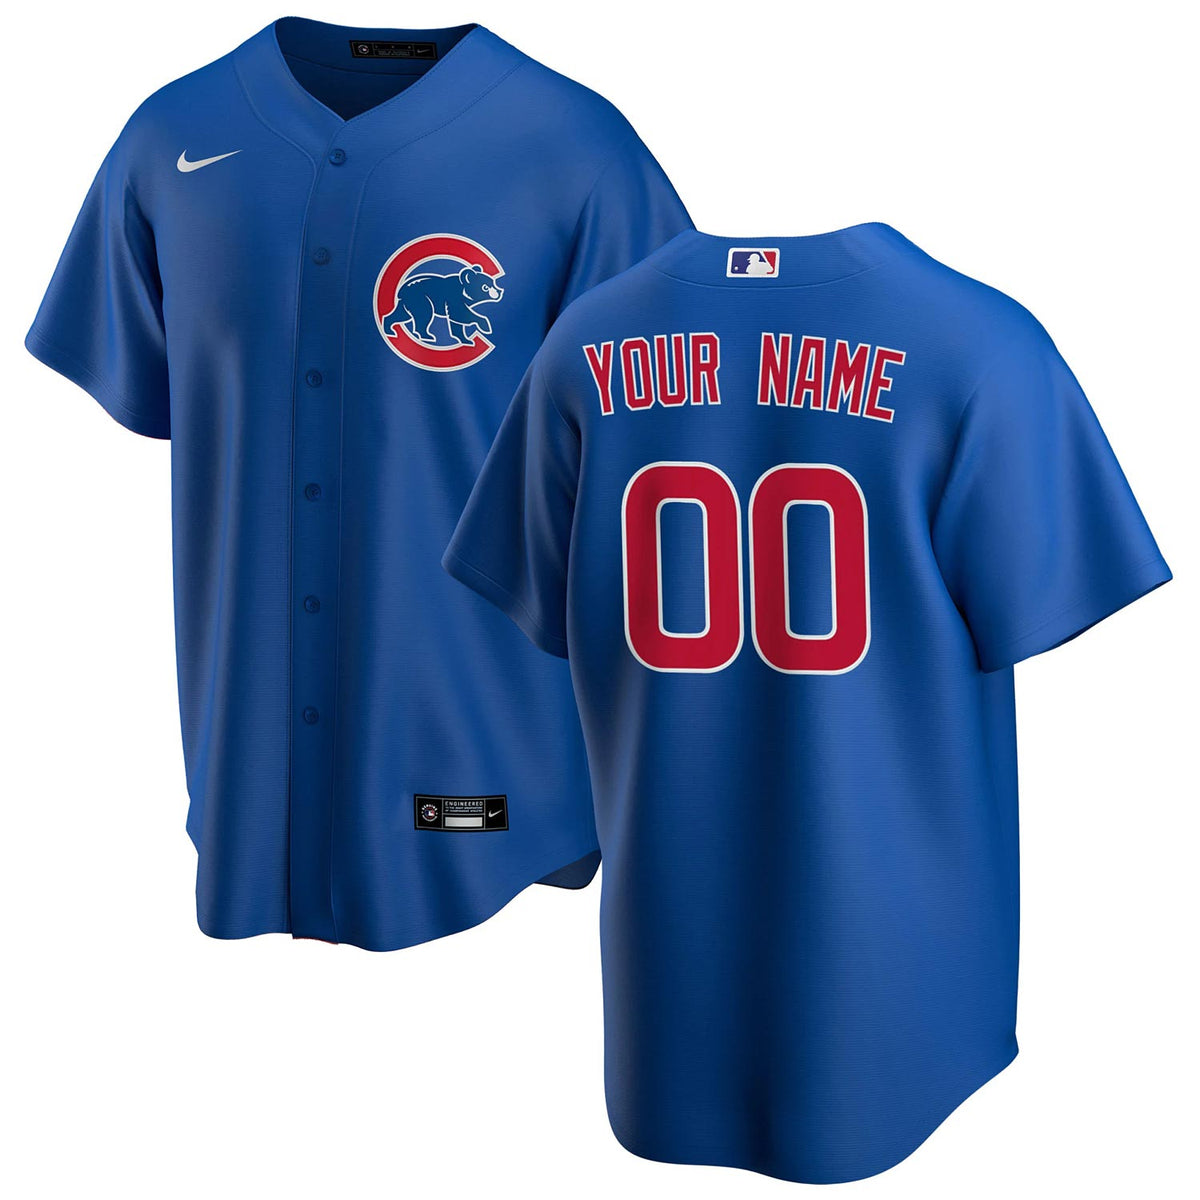 South Bend Cubs Youth Replica Jersey